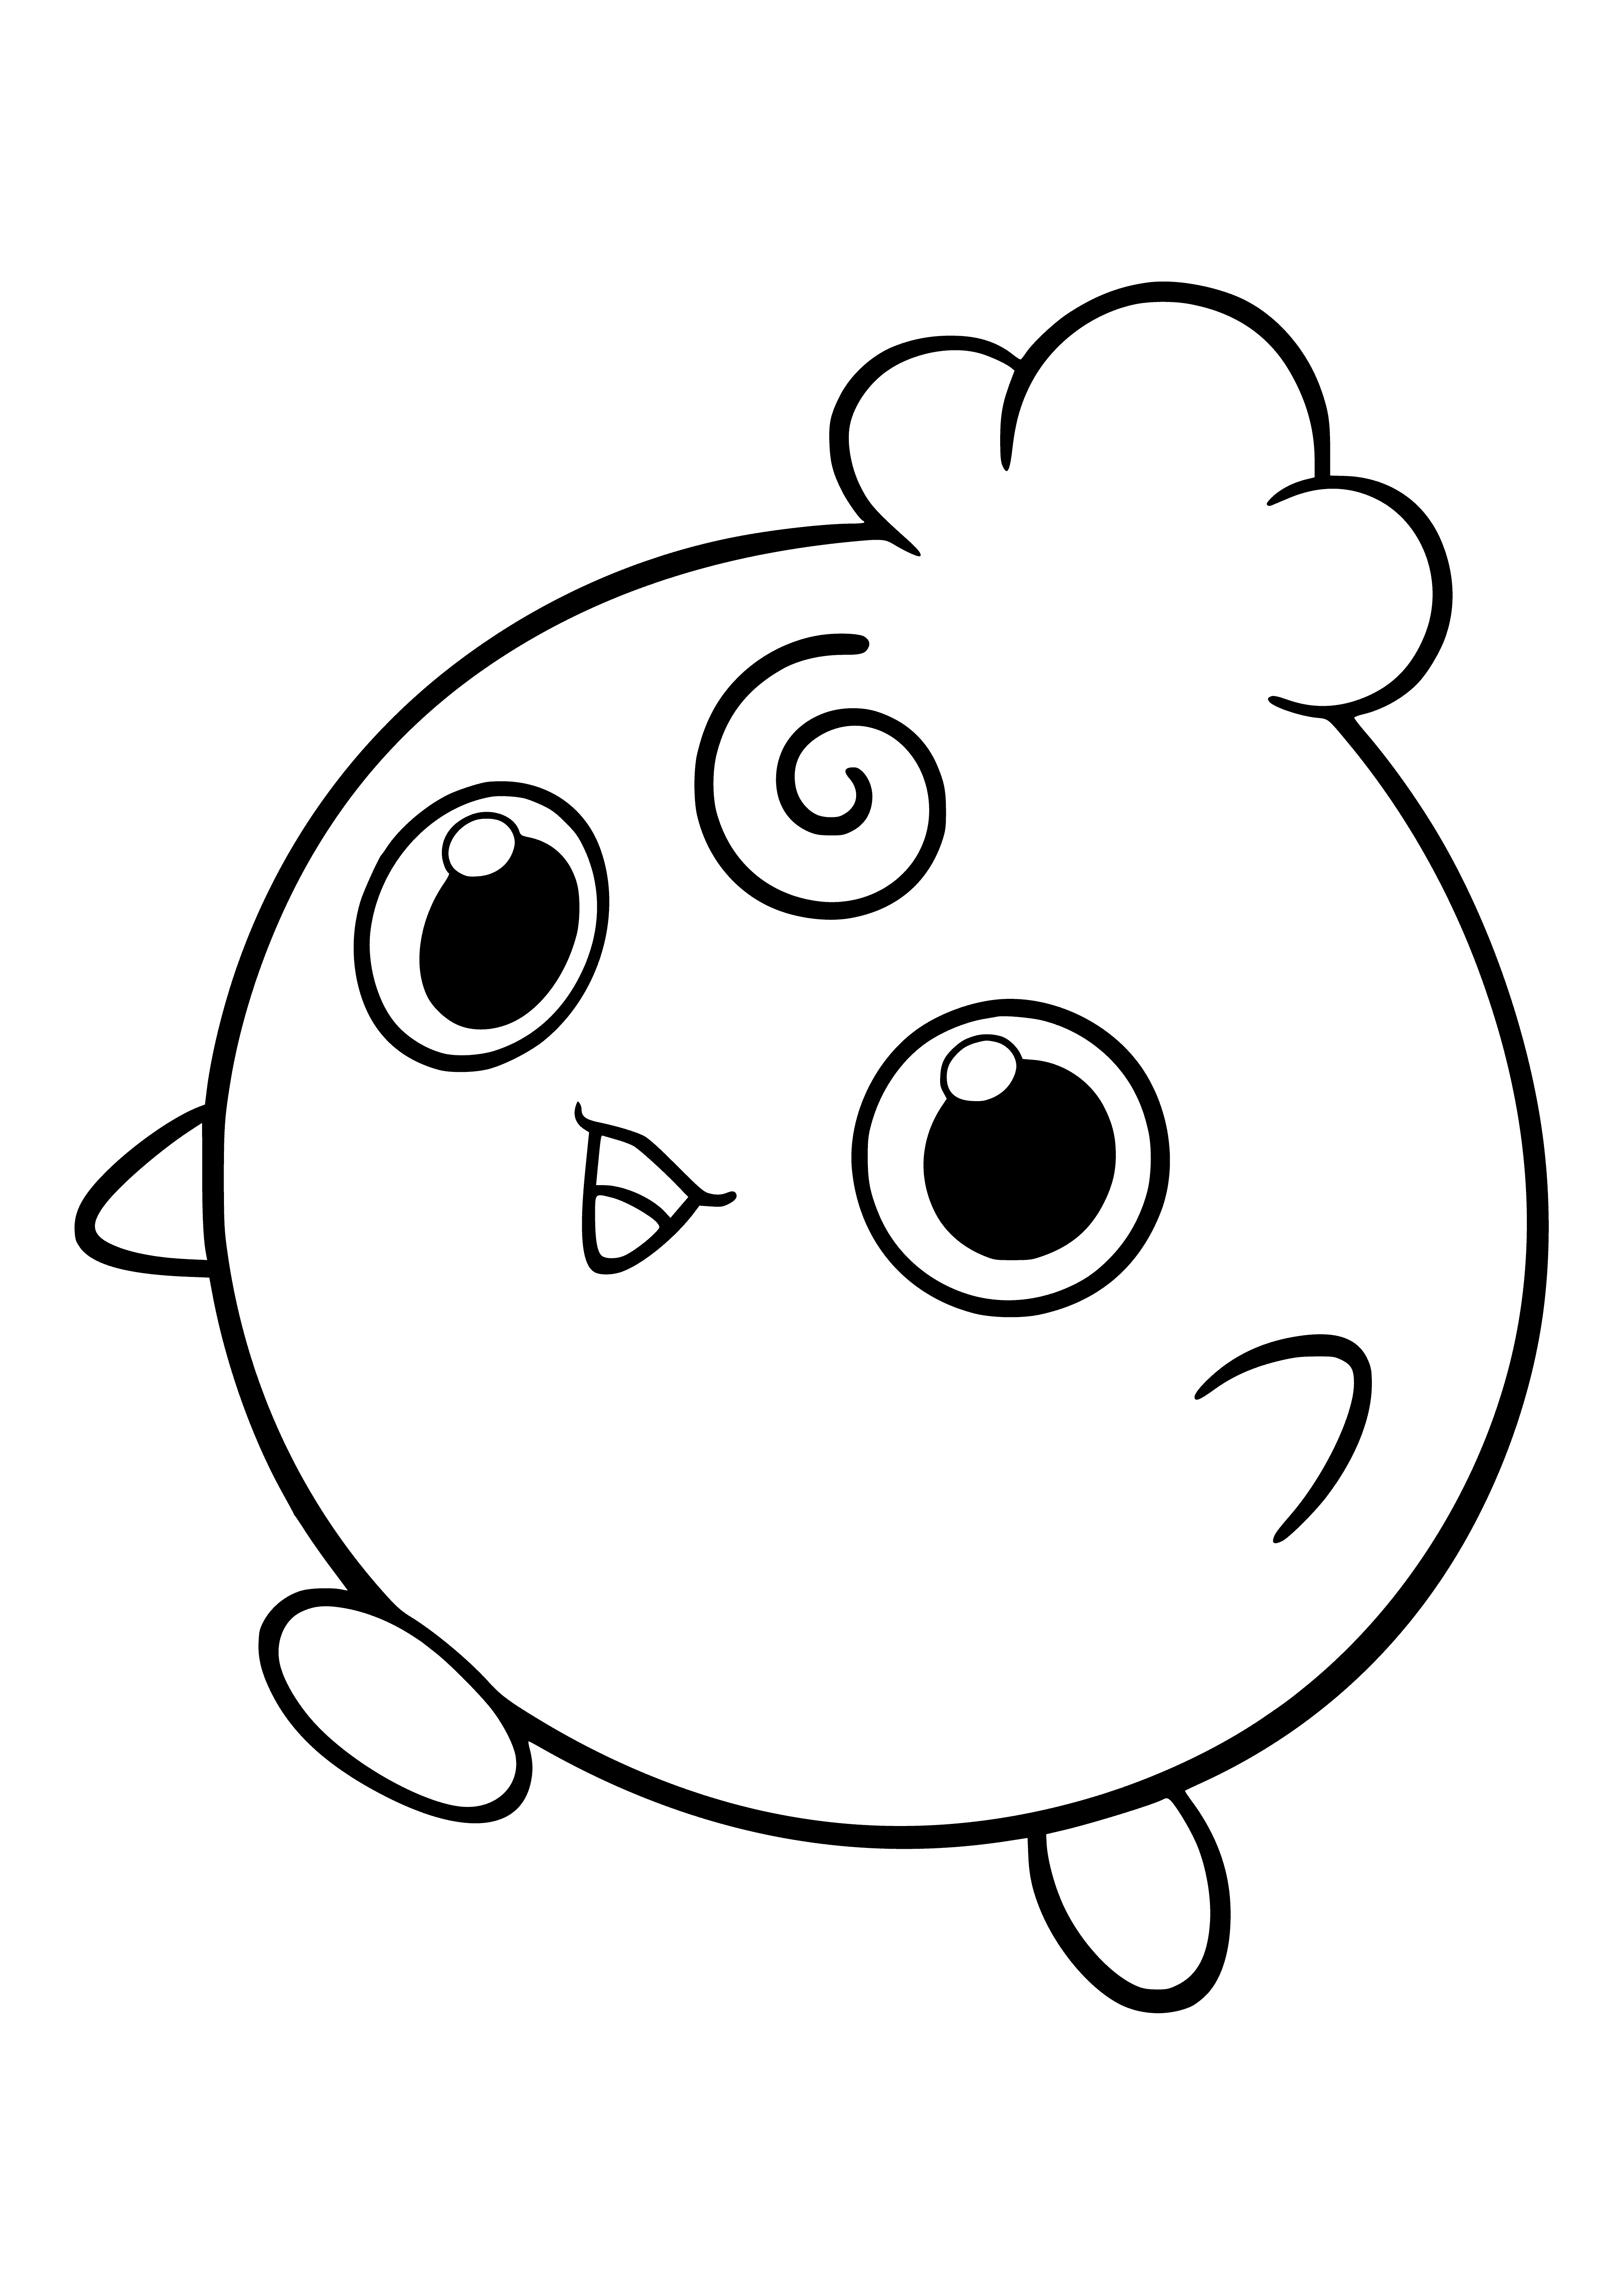 coloring page: Small, green Pokemon w/ white stomach, big blue eyes & small mouth. Arms & legs short & stubby, two small bumps on back.